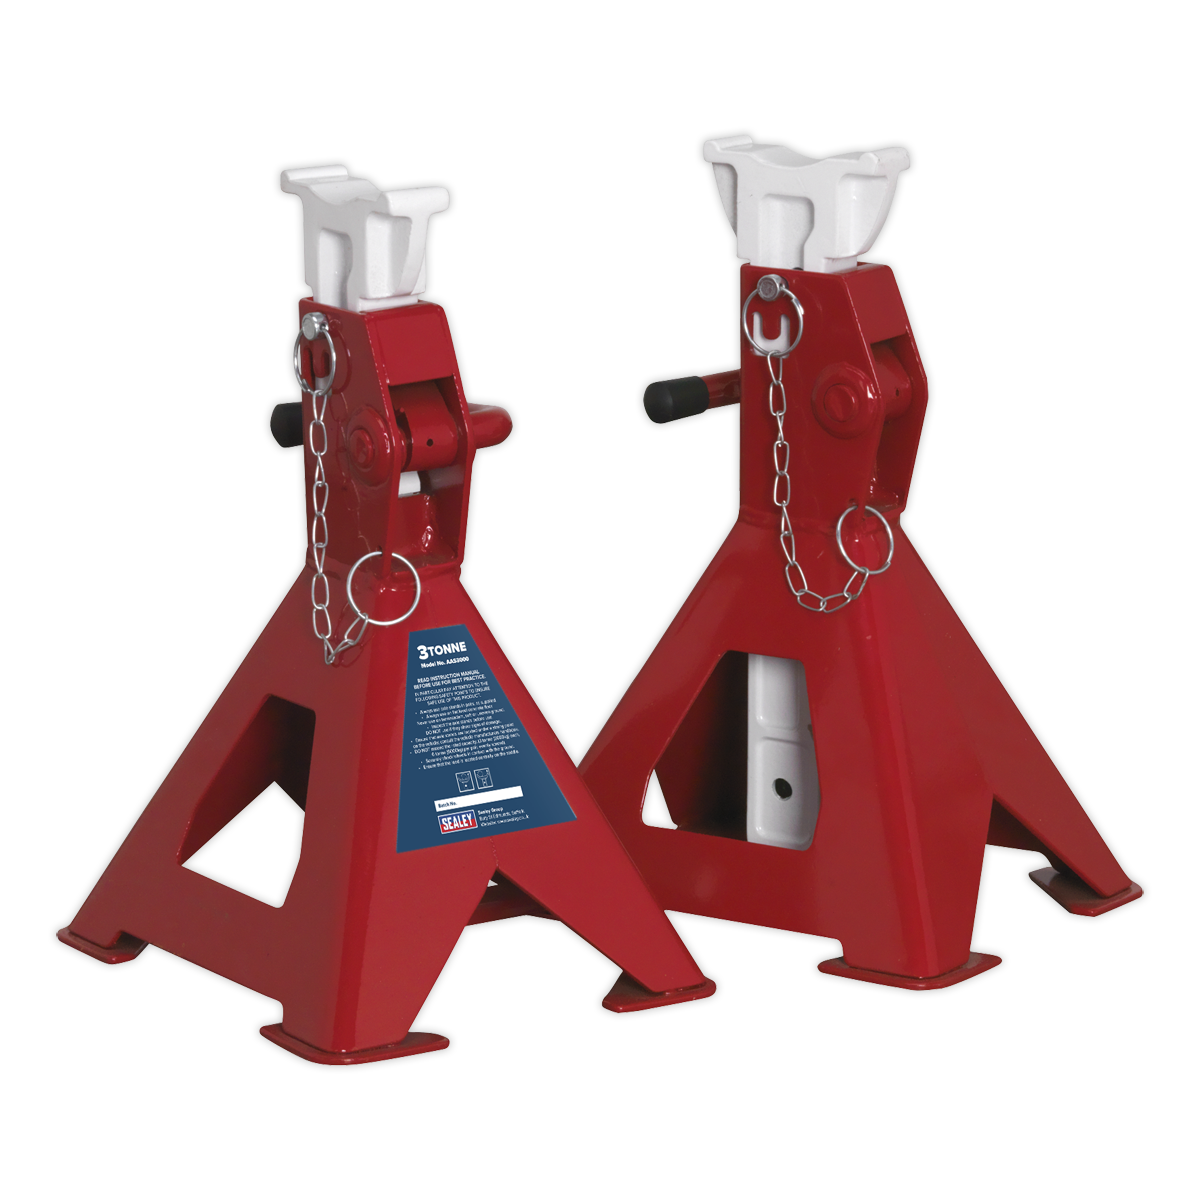 Sealey Garage Axle Stands (Pair) 3tonne Capacity per Stand Auto Rise Ratchet AAS300